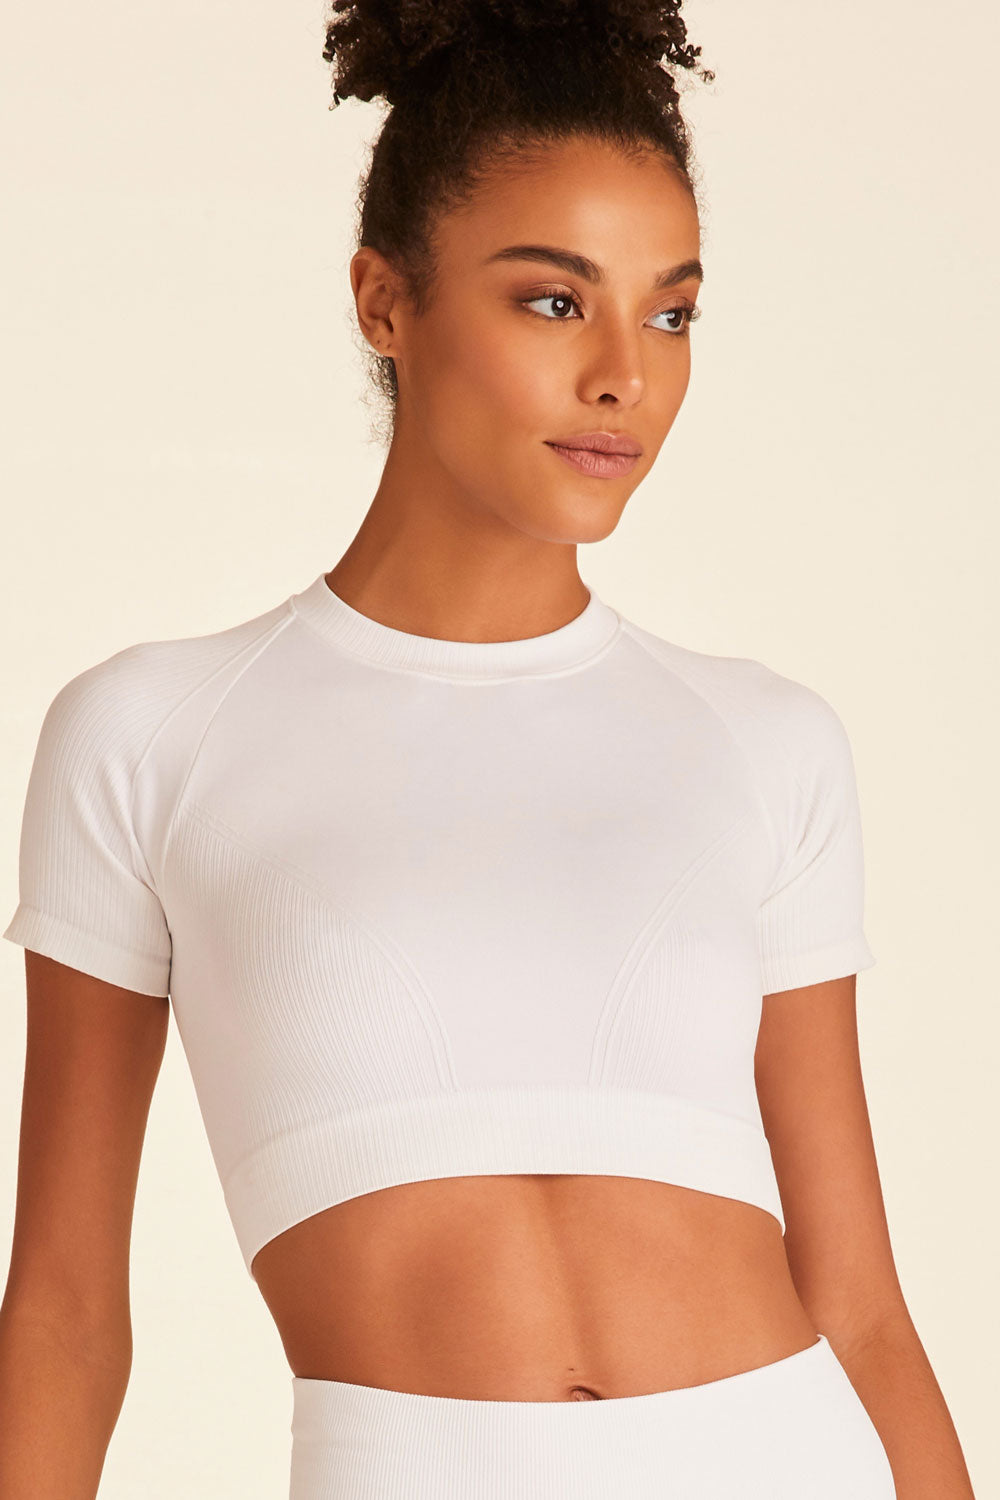 Barre Seamless Tee - White Tee, Workout Crop Tops